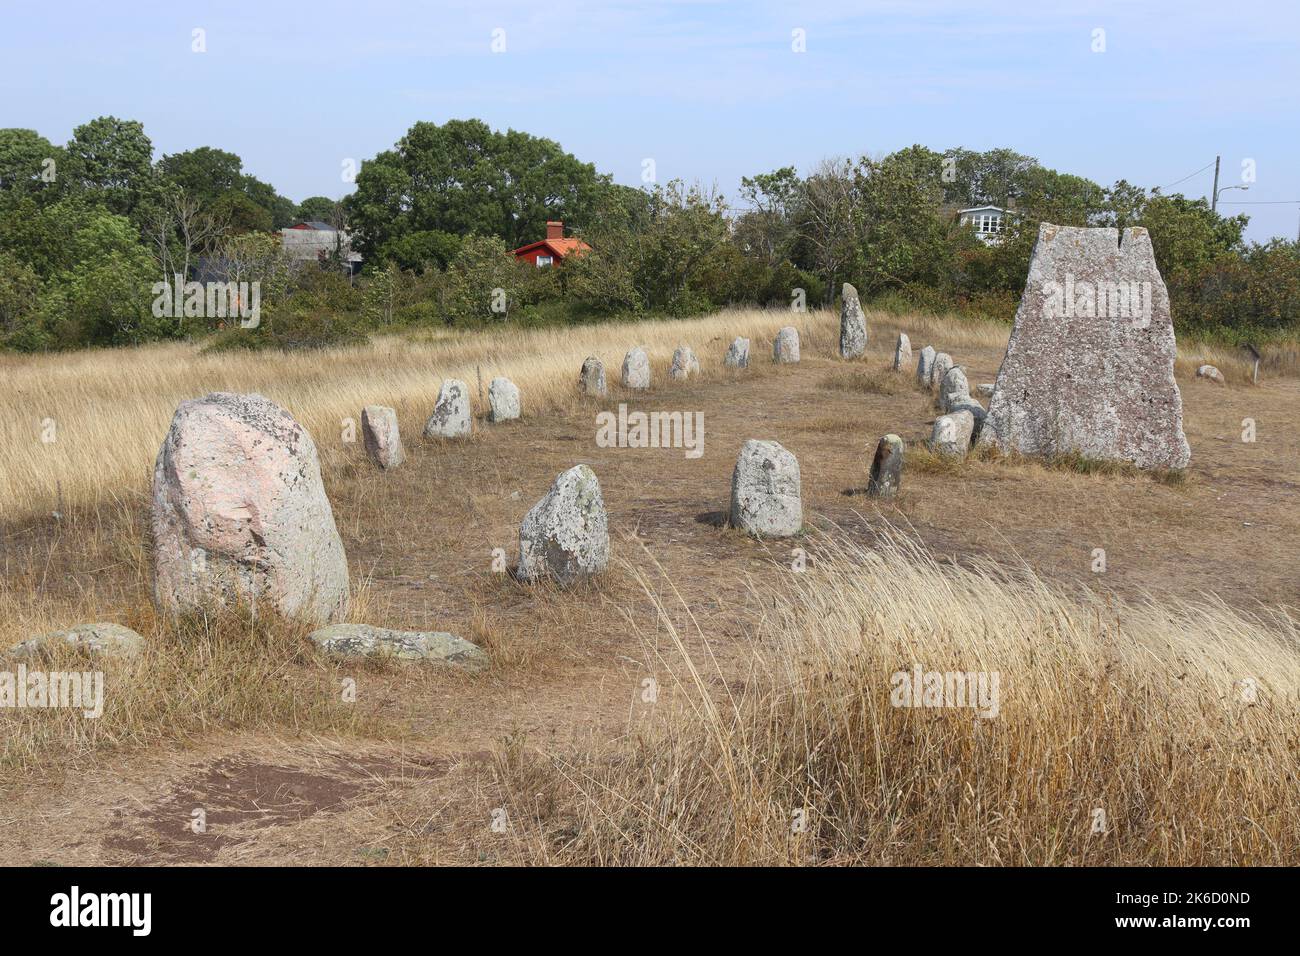 View of Gettlinge Grave Field on the island of Öland in Sweden. The Viking stone ship burial site is an important archeological area in Scandinavia. Stock Photo